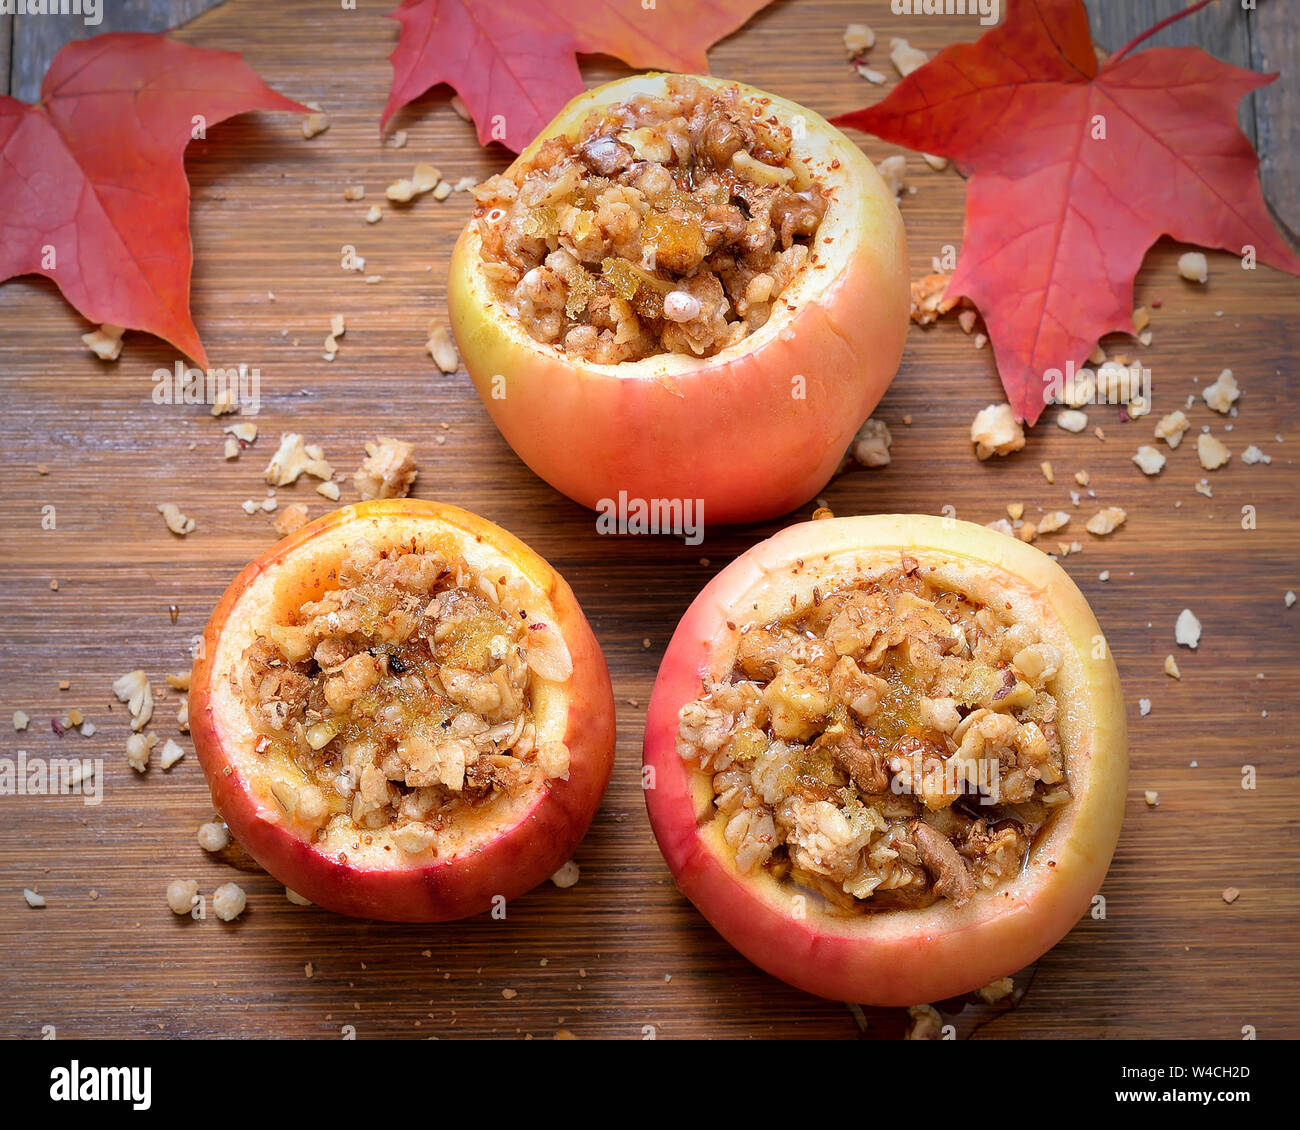 Baked apples stuffed with nut, honey and granola, top view Stock Photo